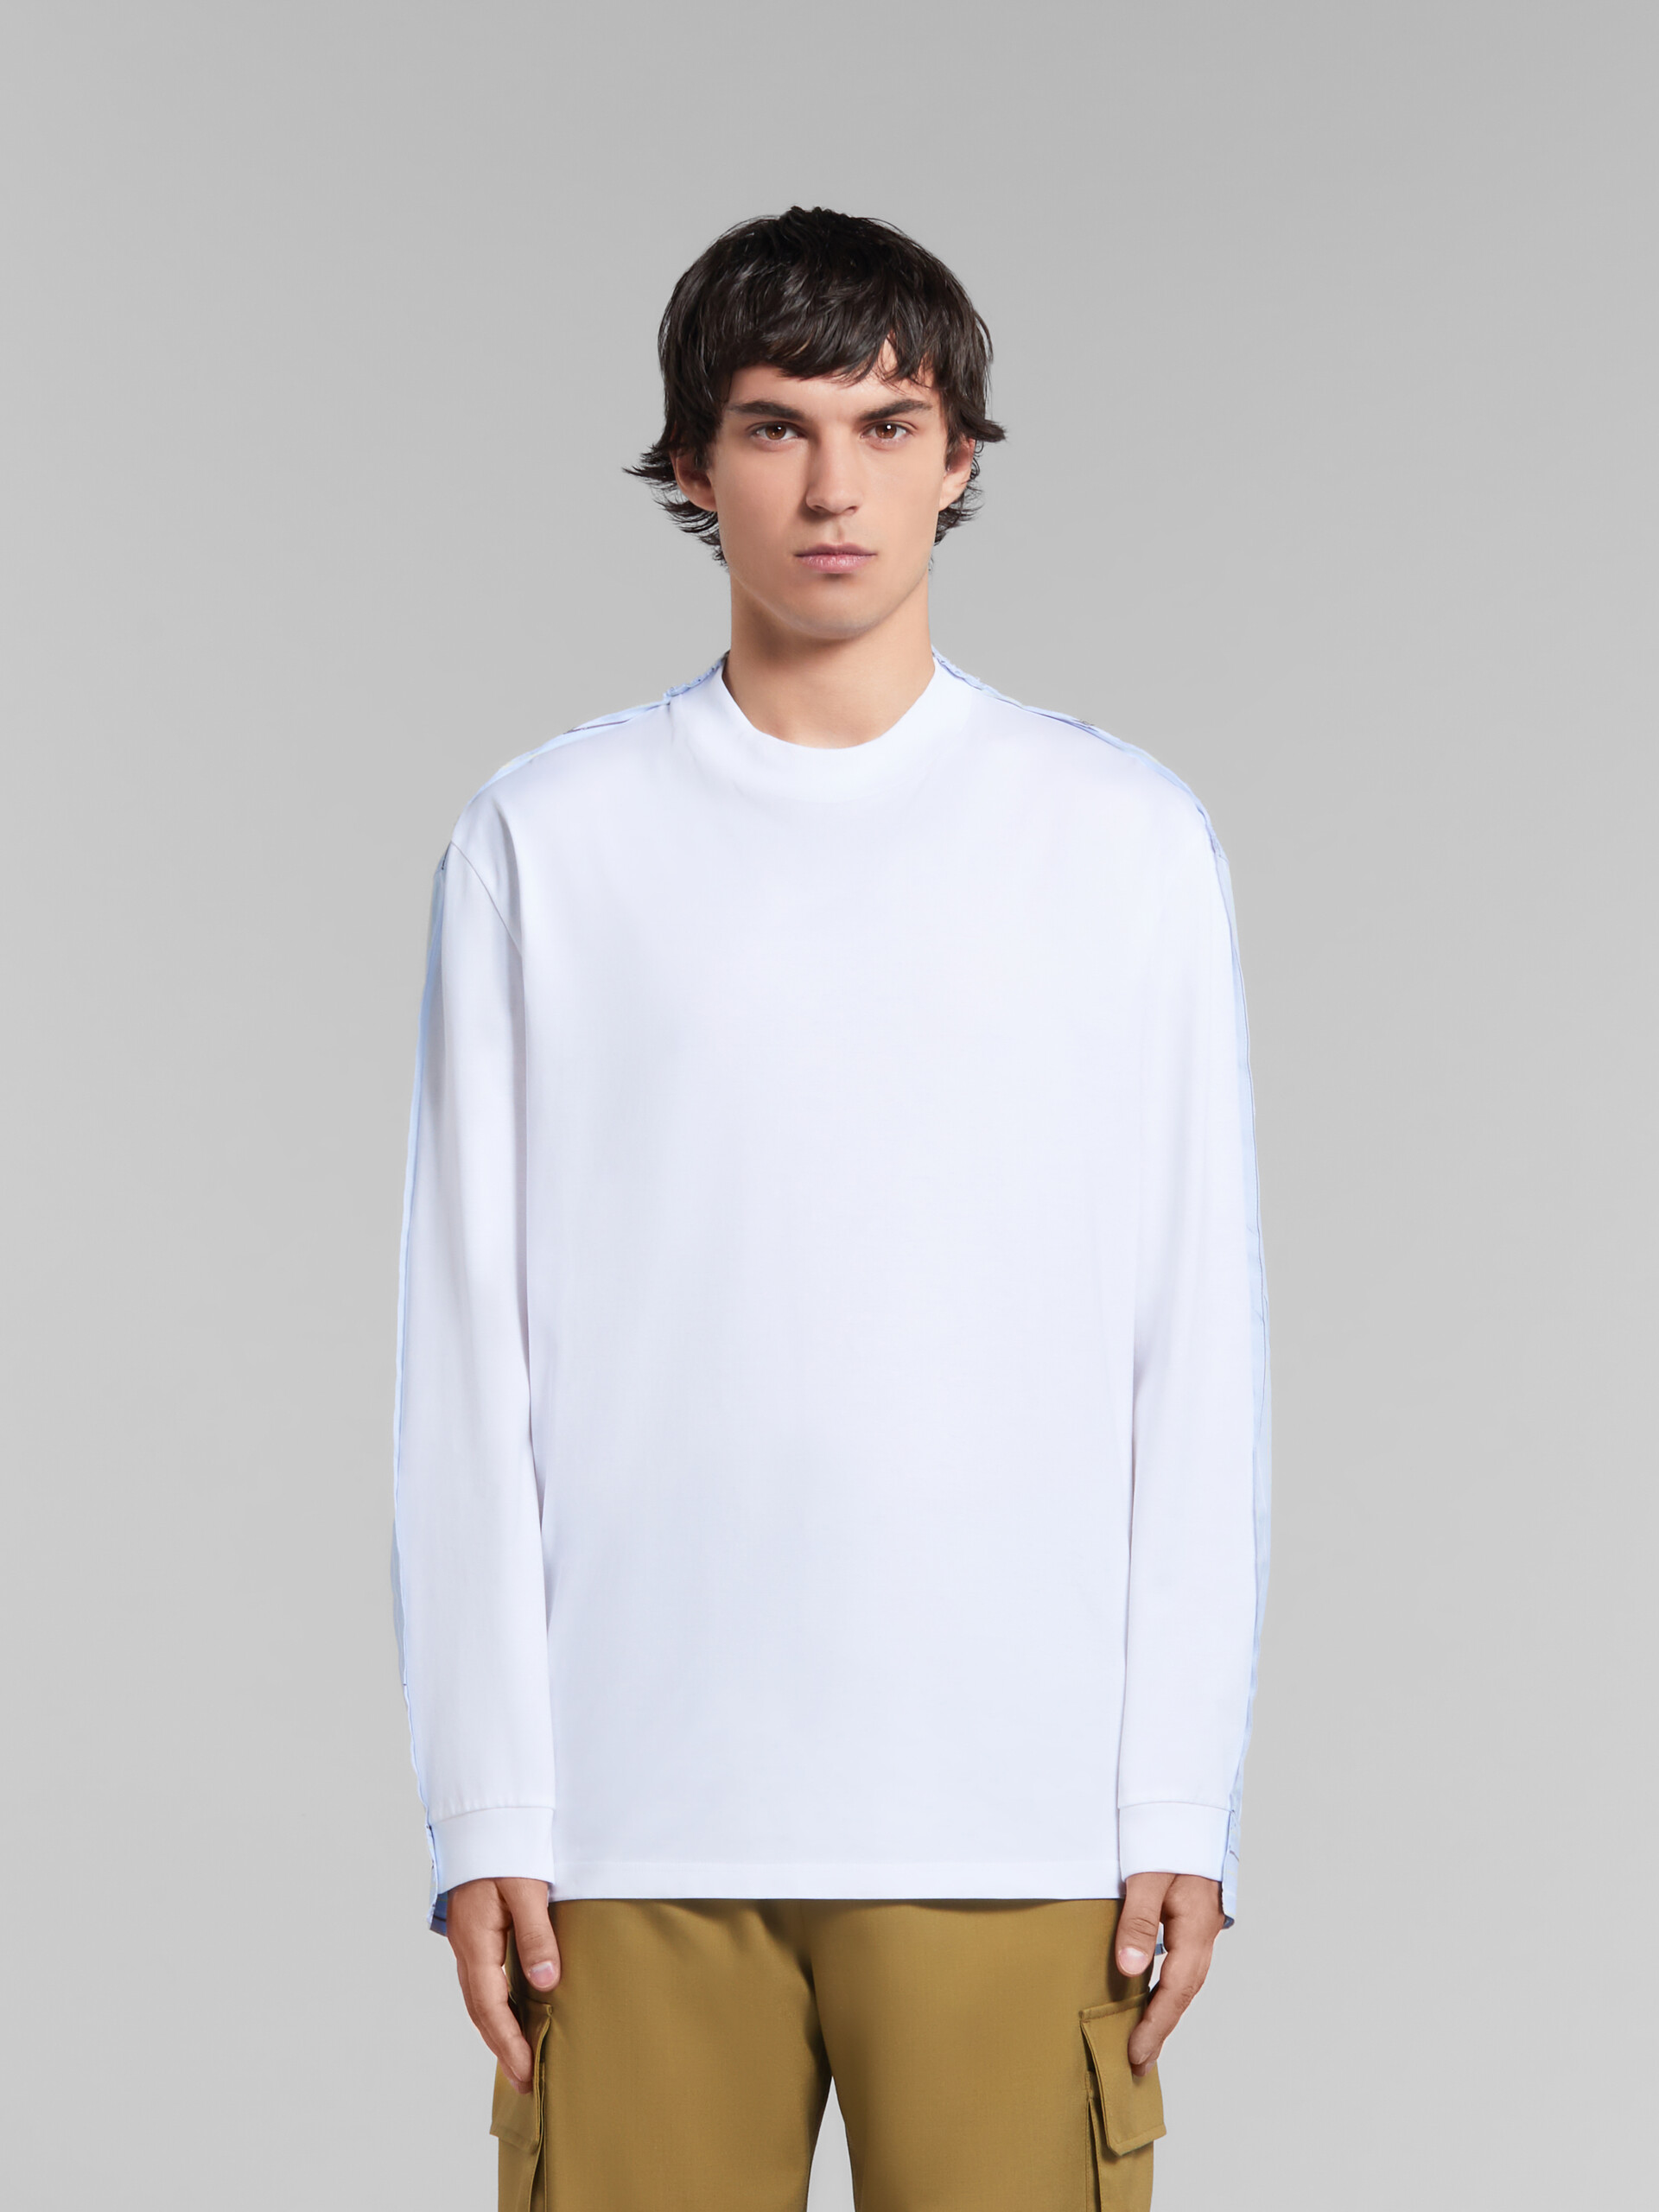 White long-sleeved T-shirt with striped back - T-shirts - Image 2